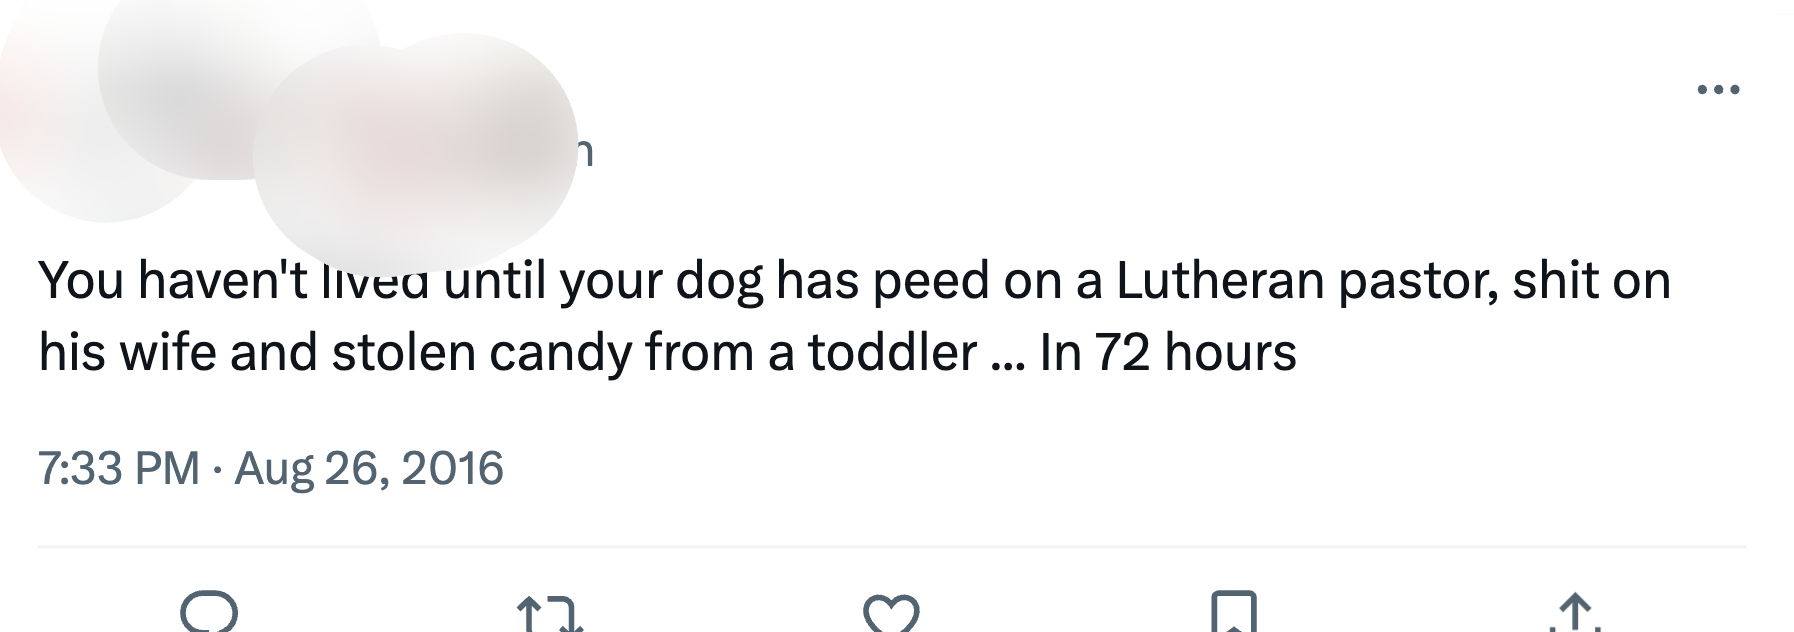 Tweet from blurred out user: "You haven't lived until your dog has peed on a Lutheran pastor, shit on his wife and stolen candy from a toddler... In 72 hours." Aug 26, 2016